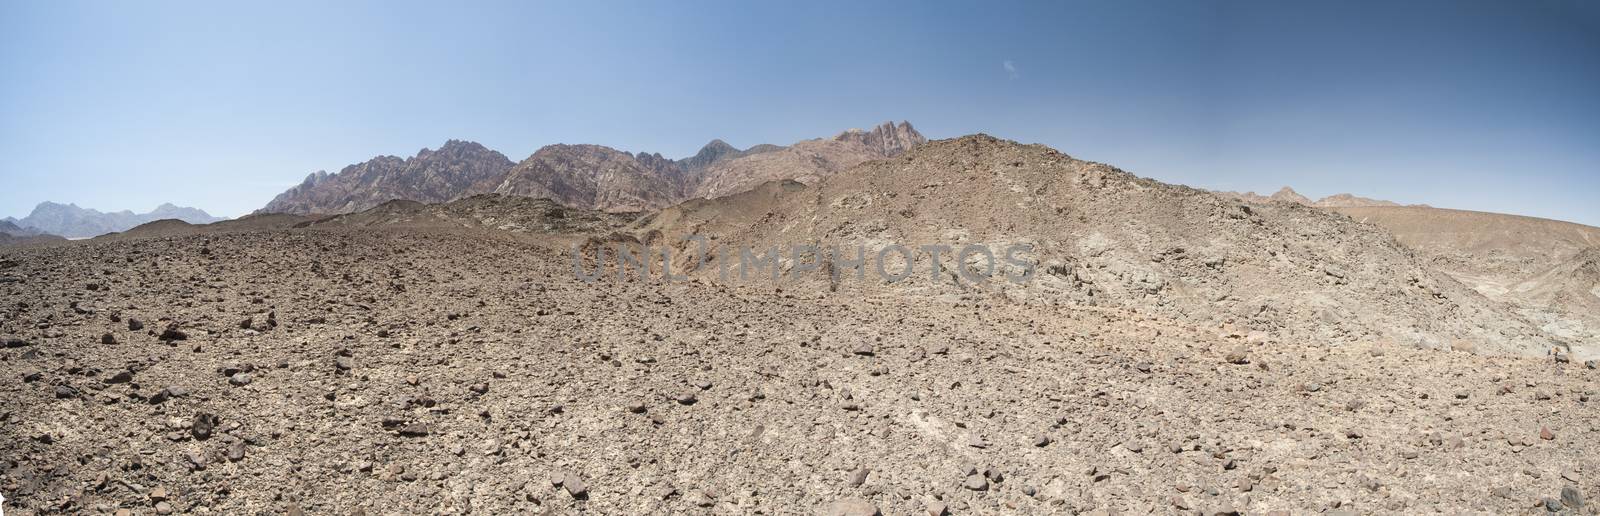 Panorama of rocky mountain slope landscape in an arid desert environment